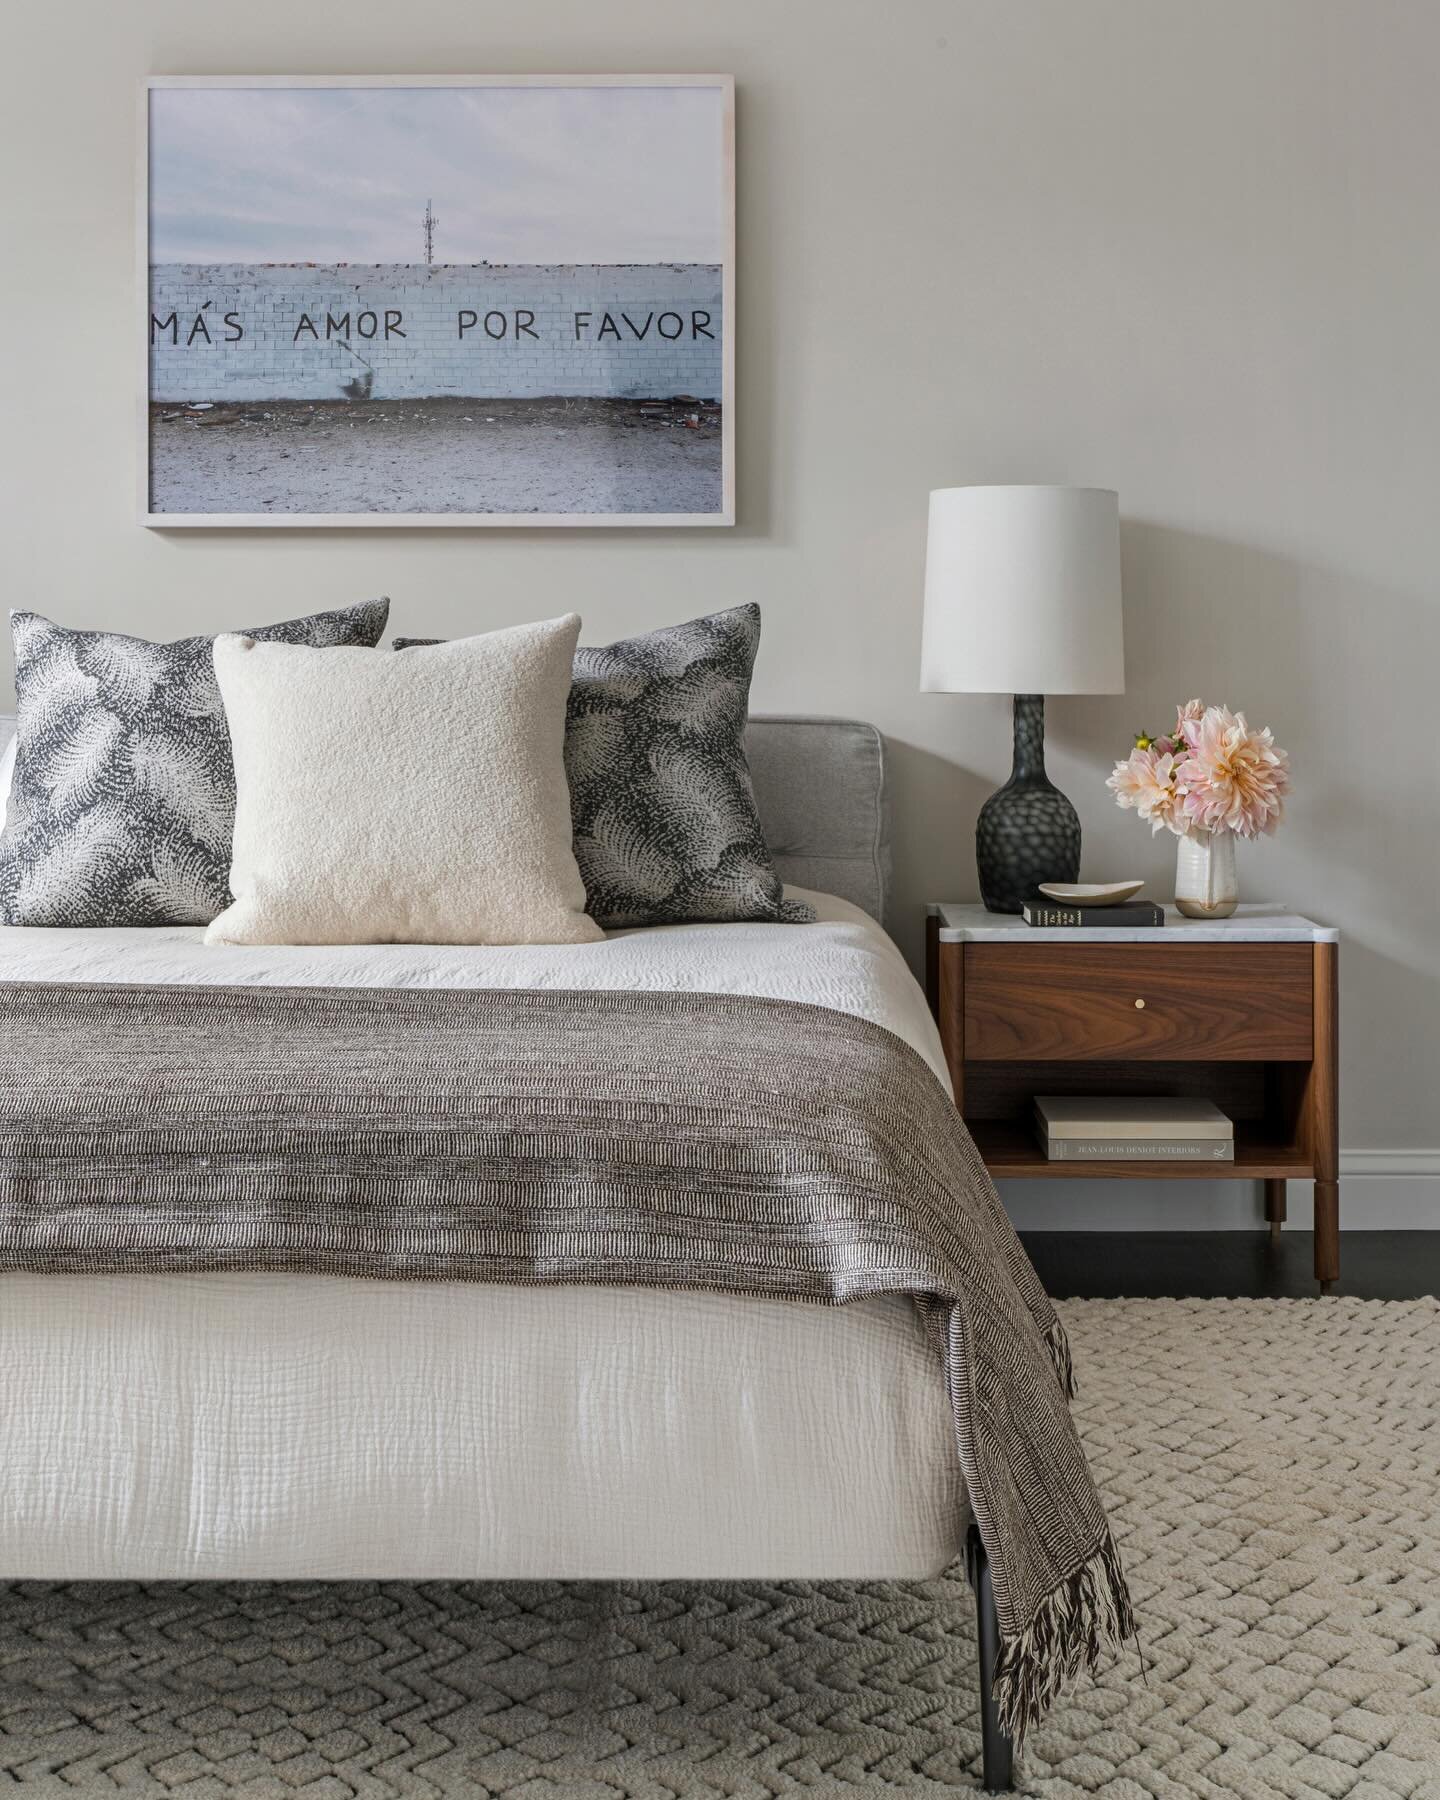 With this rainy morning, a comfy bed is all I want&hellip;having a slow-ish morning before heading to the studio 🤍

Interior Design: @florencechouxlivingston 
Photo: @daviddlivingston 
.
.
.
#bedroomdesign #primarybedroom #guestbedroomideas #quietlu